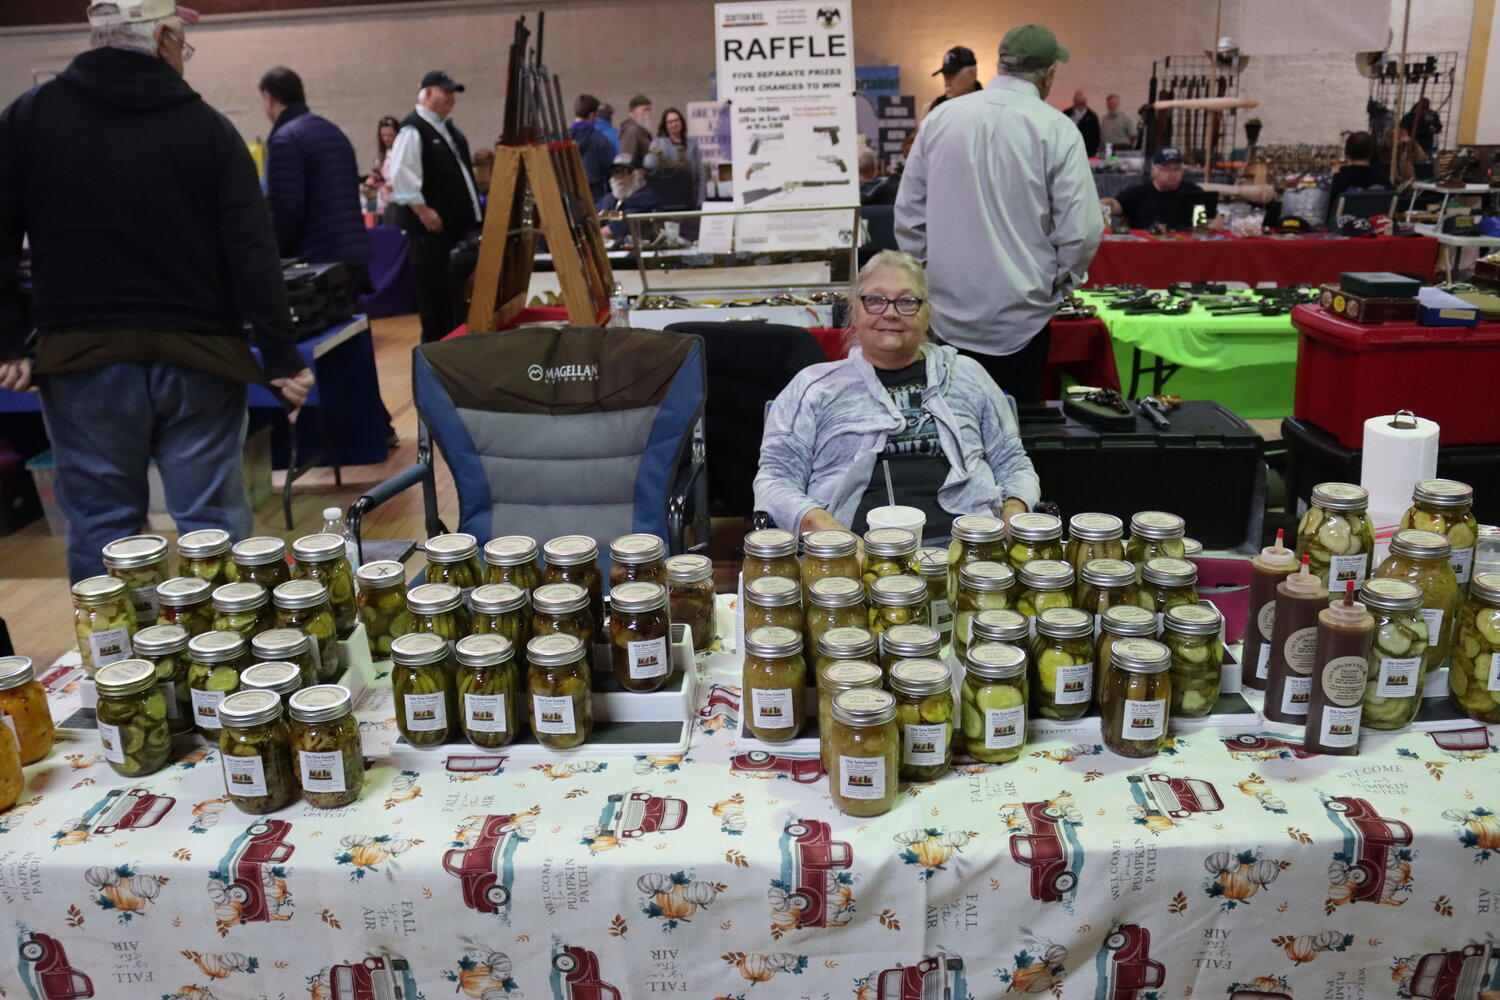 Jana Palmer of Olde Tyme Canning, out of Whitney, selling delicious, pickled products to event-goers.